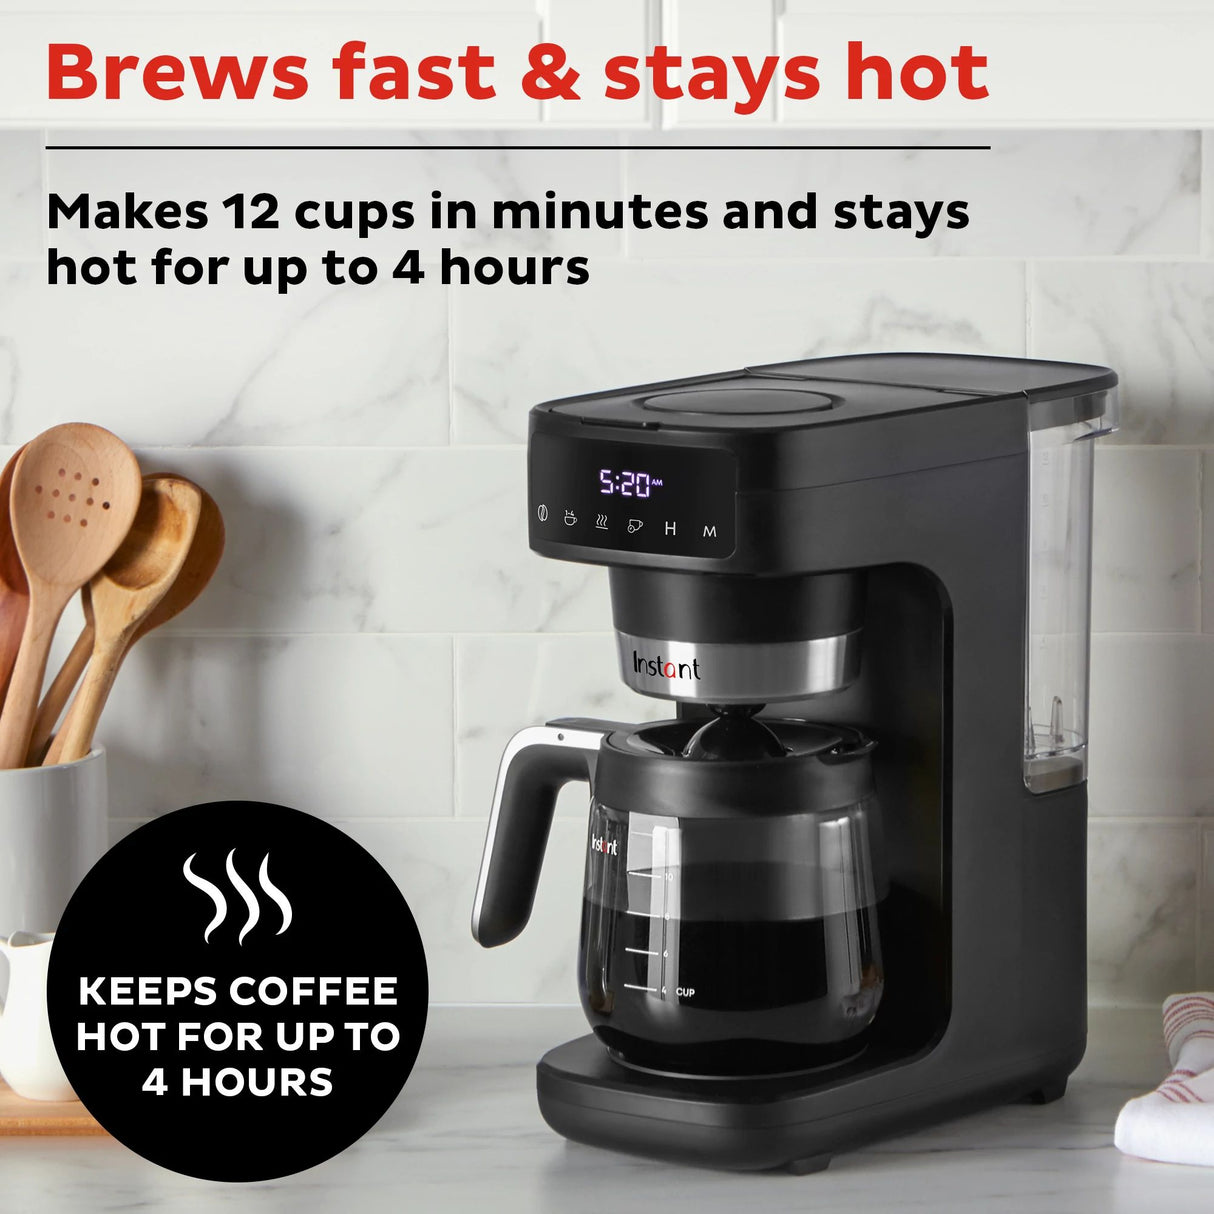  Instant® Infusion Brew Plus 12-cup Coffee Maker on counter with text brews fast &amp; stays hot